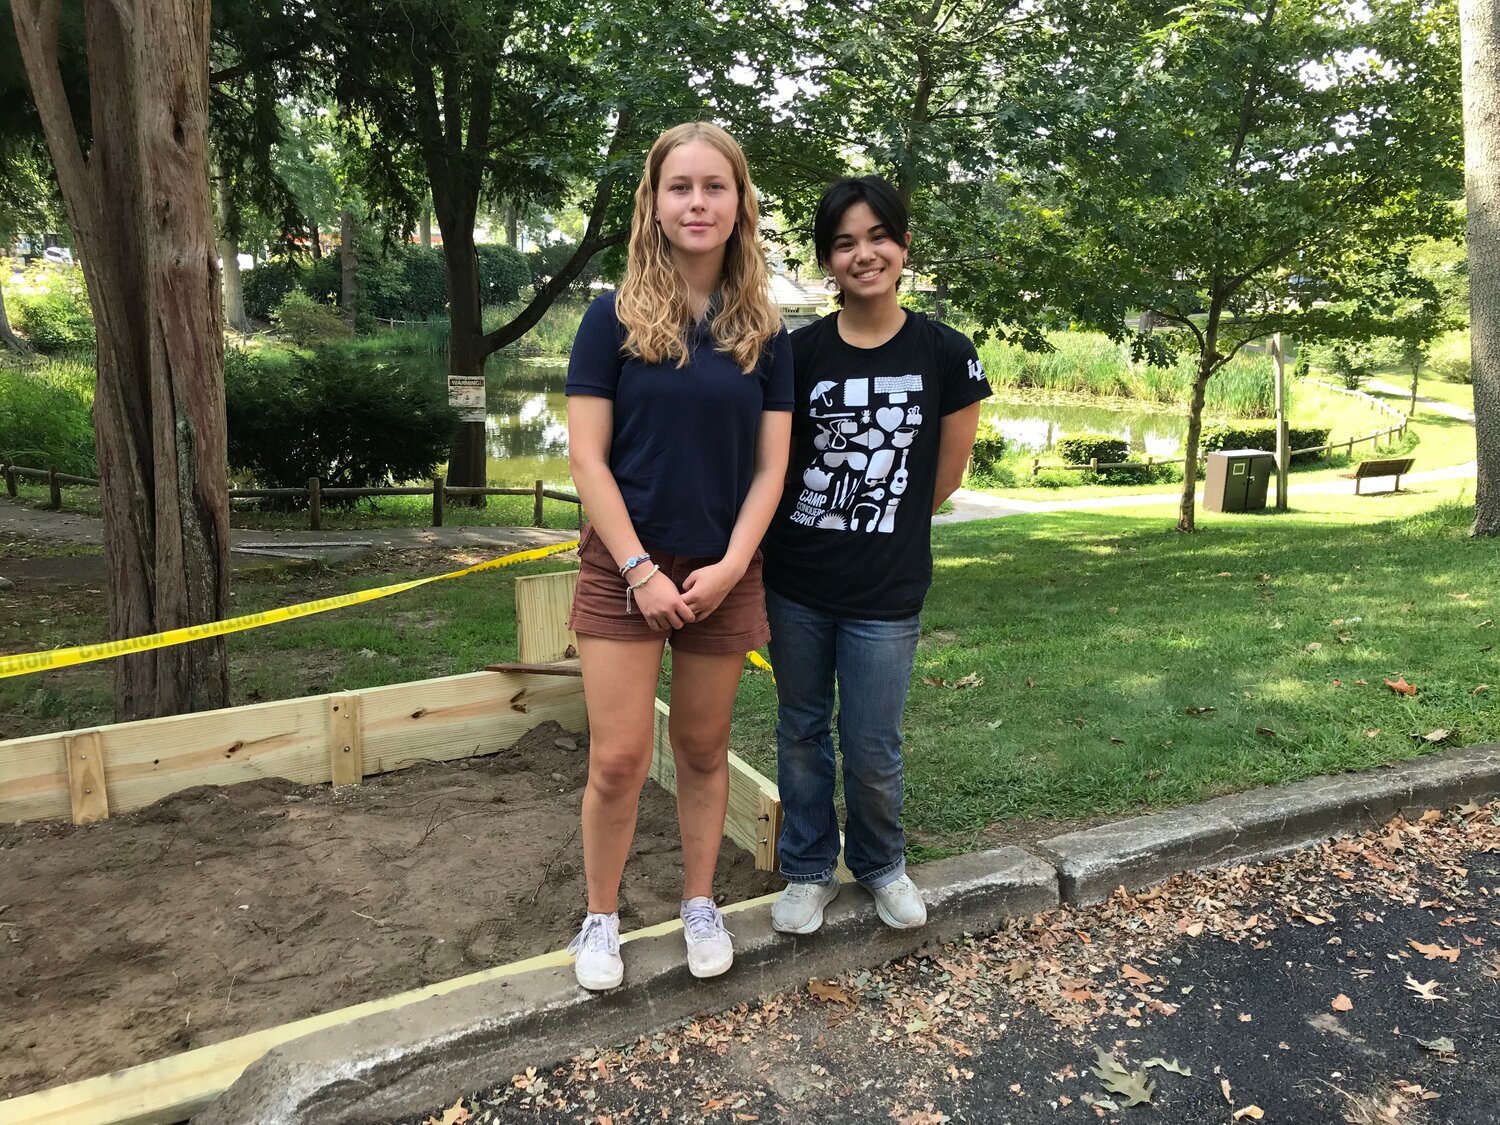 Barrington High School’s Emma Pautz (left) and Sabine Cladis stand at the site of the new compost drop-off location near the Barrington Senior Center parking lot.